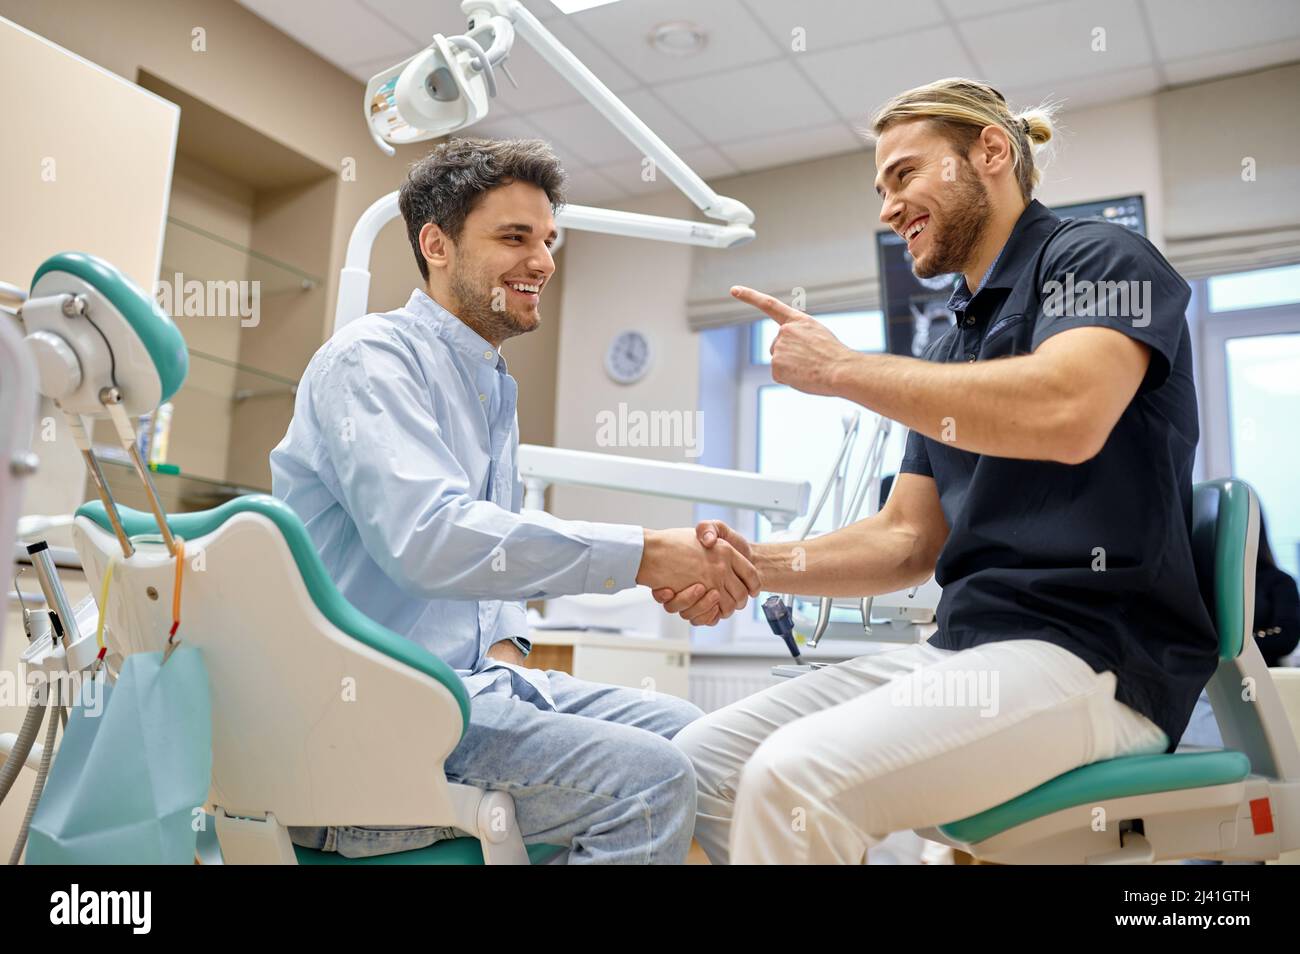 Smiling dentist shaking hand with male patient Stock Photo